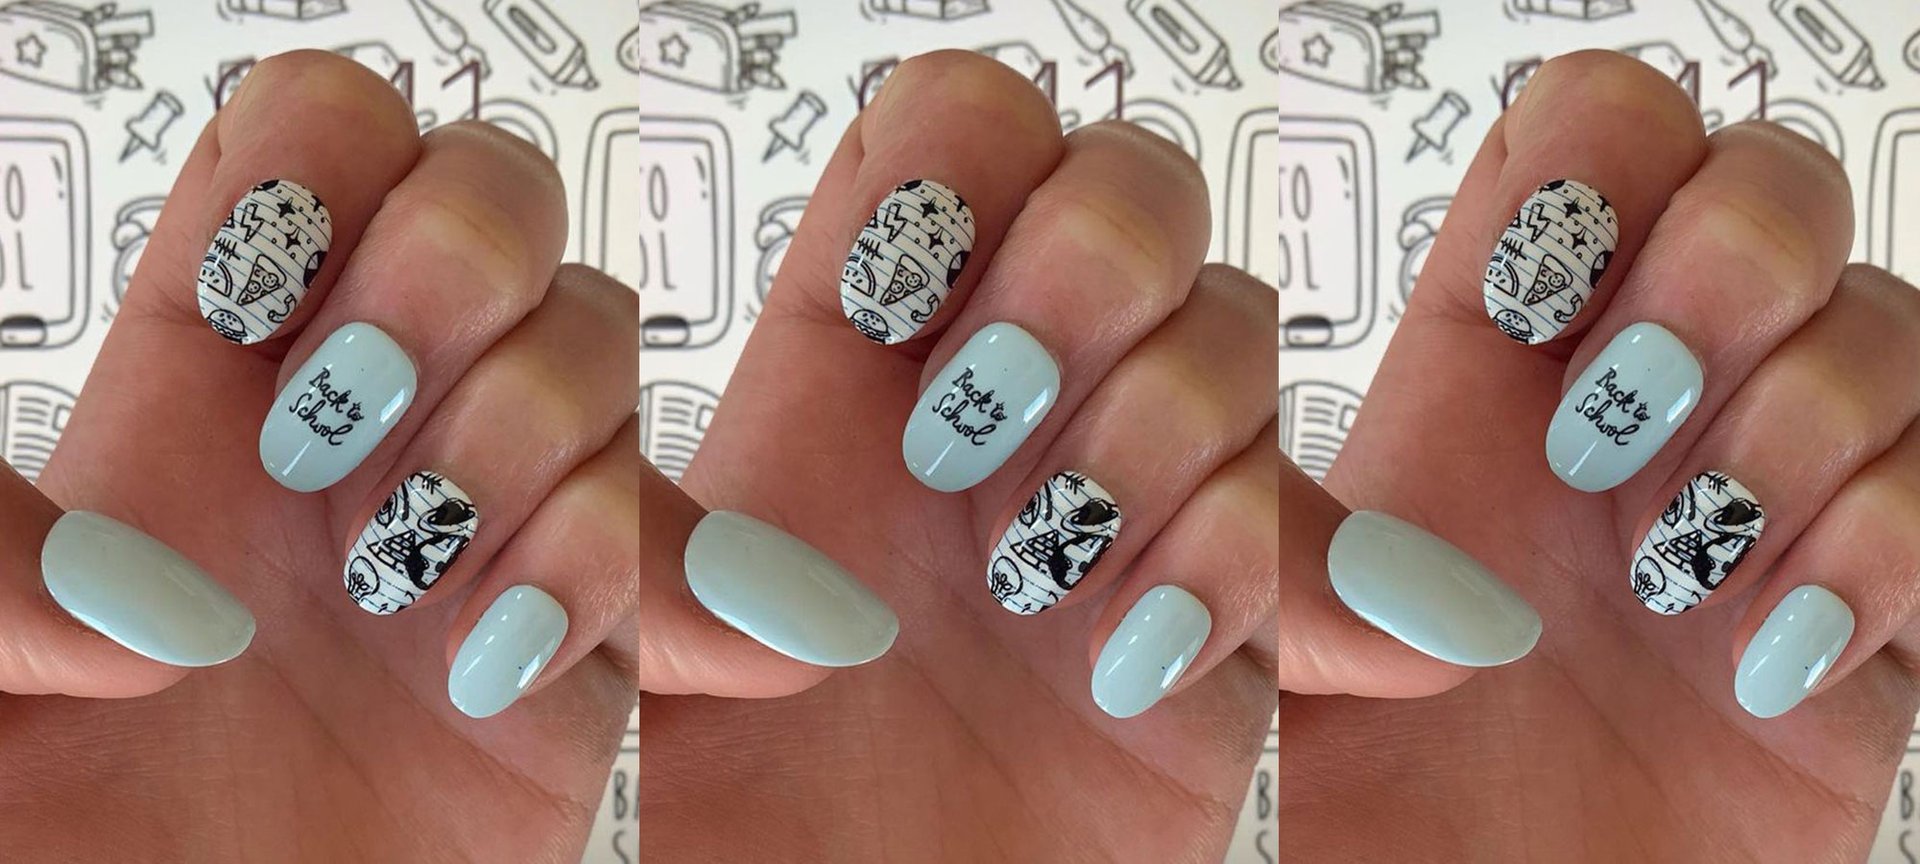 1. 10 Easy Back to School Nail Designs - wide 6